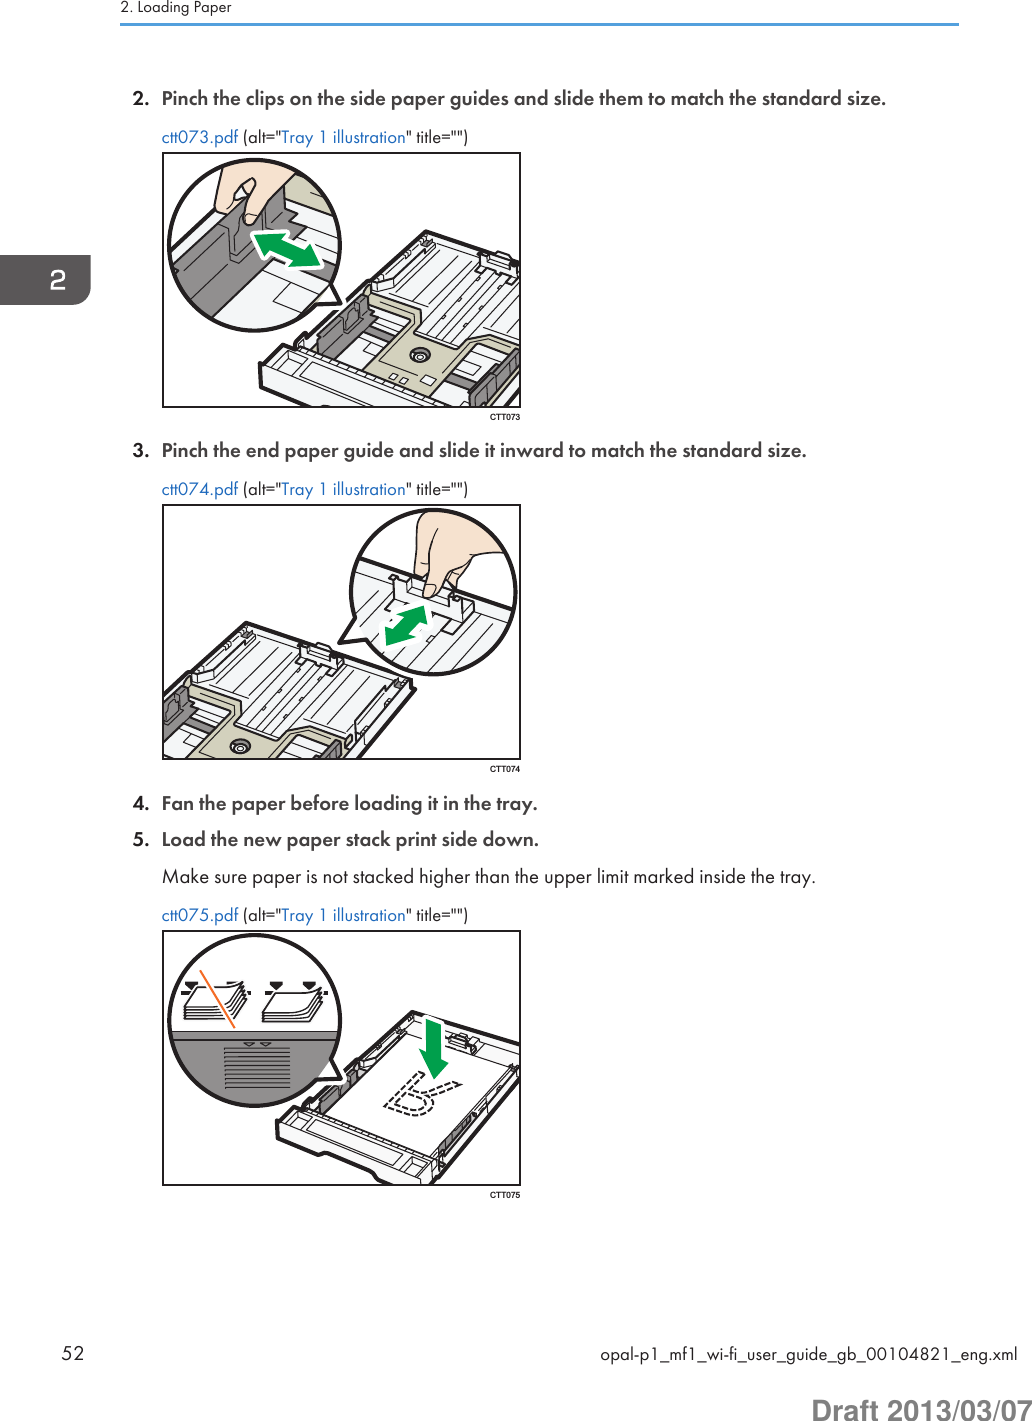 2. Pinch the clips on the side paper guides and slide them to match the standard size.ctt073.pdf (alt=&quot;Tray 1 illustration&quot; title=&quot;&quot;)CTT0733. Pinch the end paper guide and slide it inward to match the standard size.ctt074.pdf (alt=&quot;Tray 1 illustration&quot; title=&quot;&quot;)CTT0744. Fan the paper before loading it in the tray.5. Load the new paper stack print side down.Make sure paper is not stacked higher than the upper limit marked inside the tray.ctt075.pdf (alt=&quot;Tray 1 illustration&quot; title=&quot;&quot;)CTT0752. Loading Paper52 opal-p1_mf1_wi-fi_user_guide_gb_00104821_eng.xmlDraft 2013/03/07